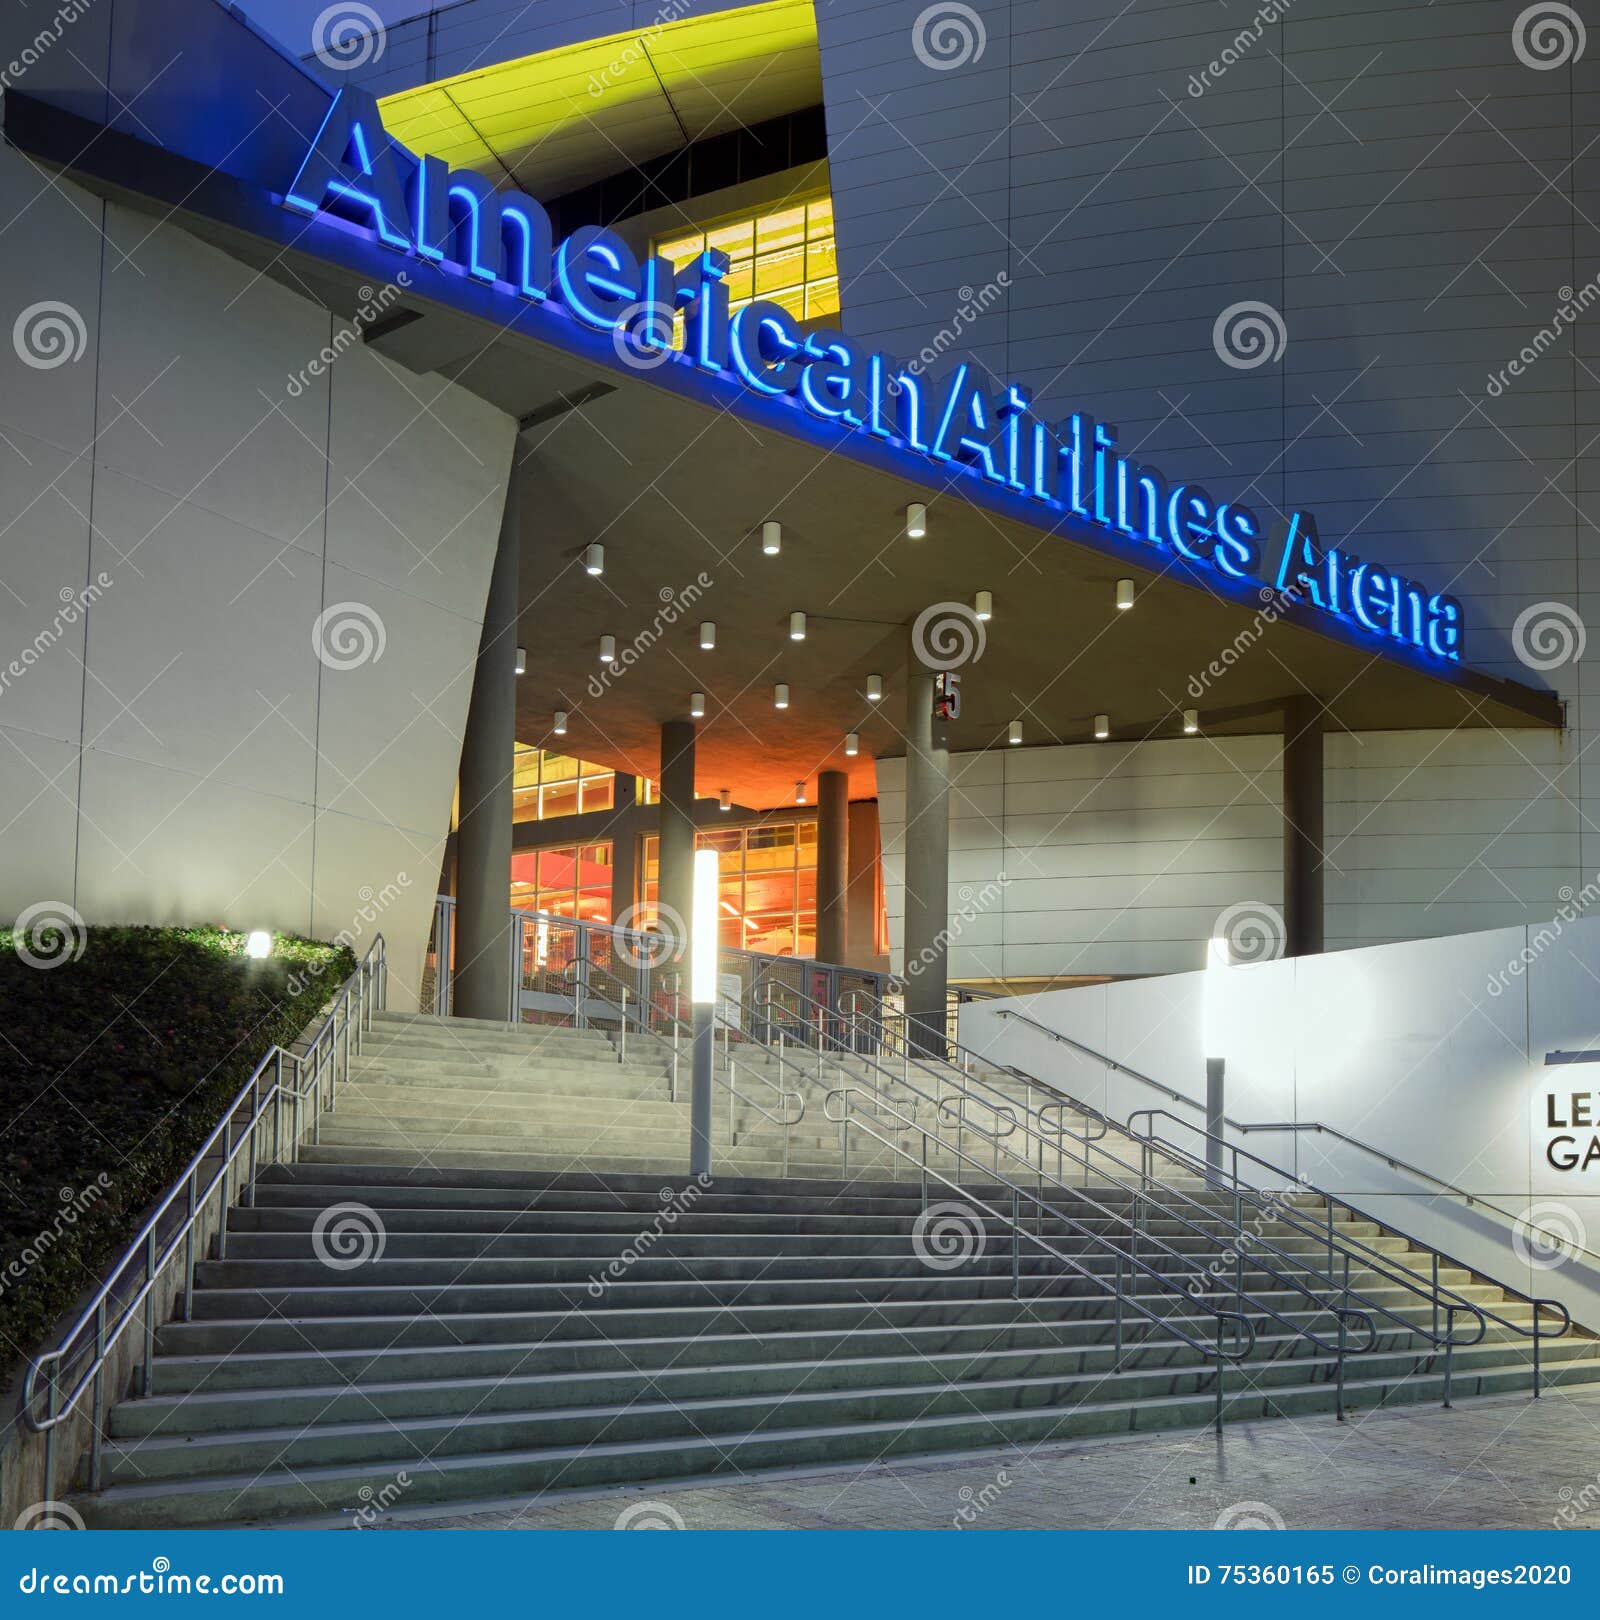 Entrance To American Airlines Arena in Midtown Miami Editorial Image